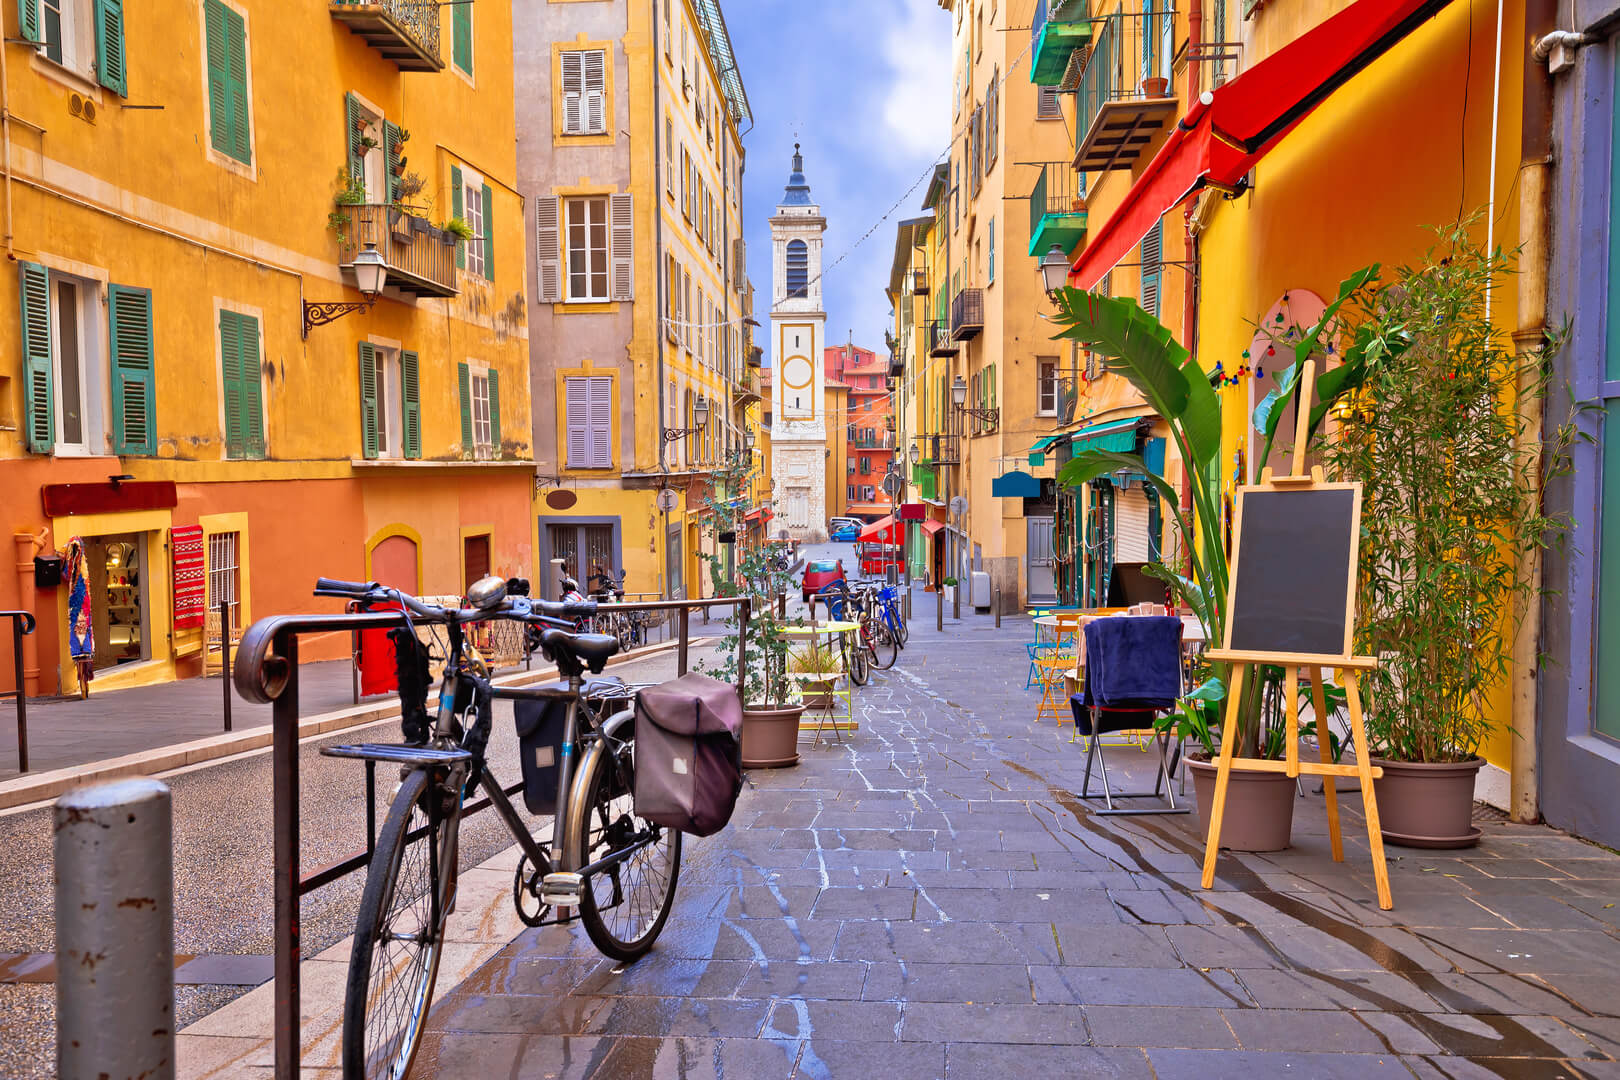 Beautiful colourful street architecture and view of the church, tourist destination of the French Riviera, Alpes Maritimes Ministry of France